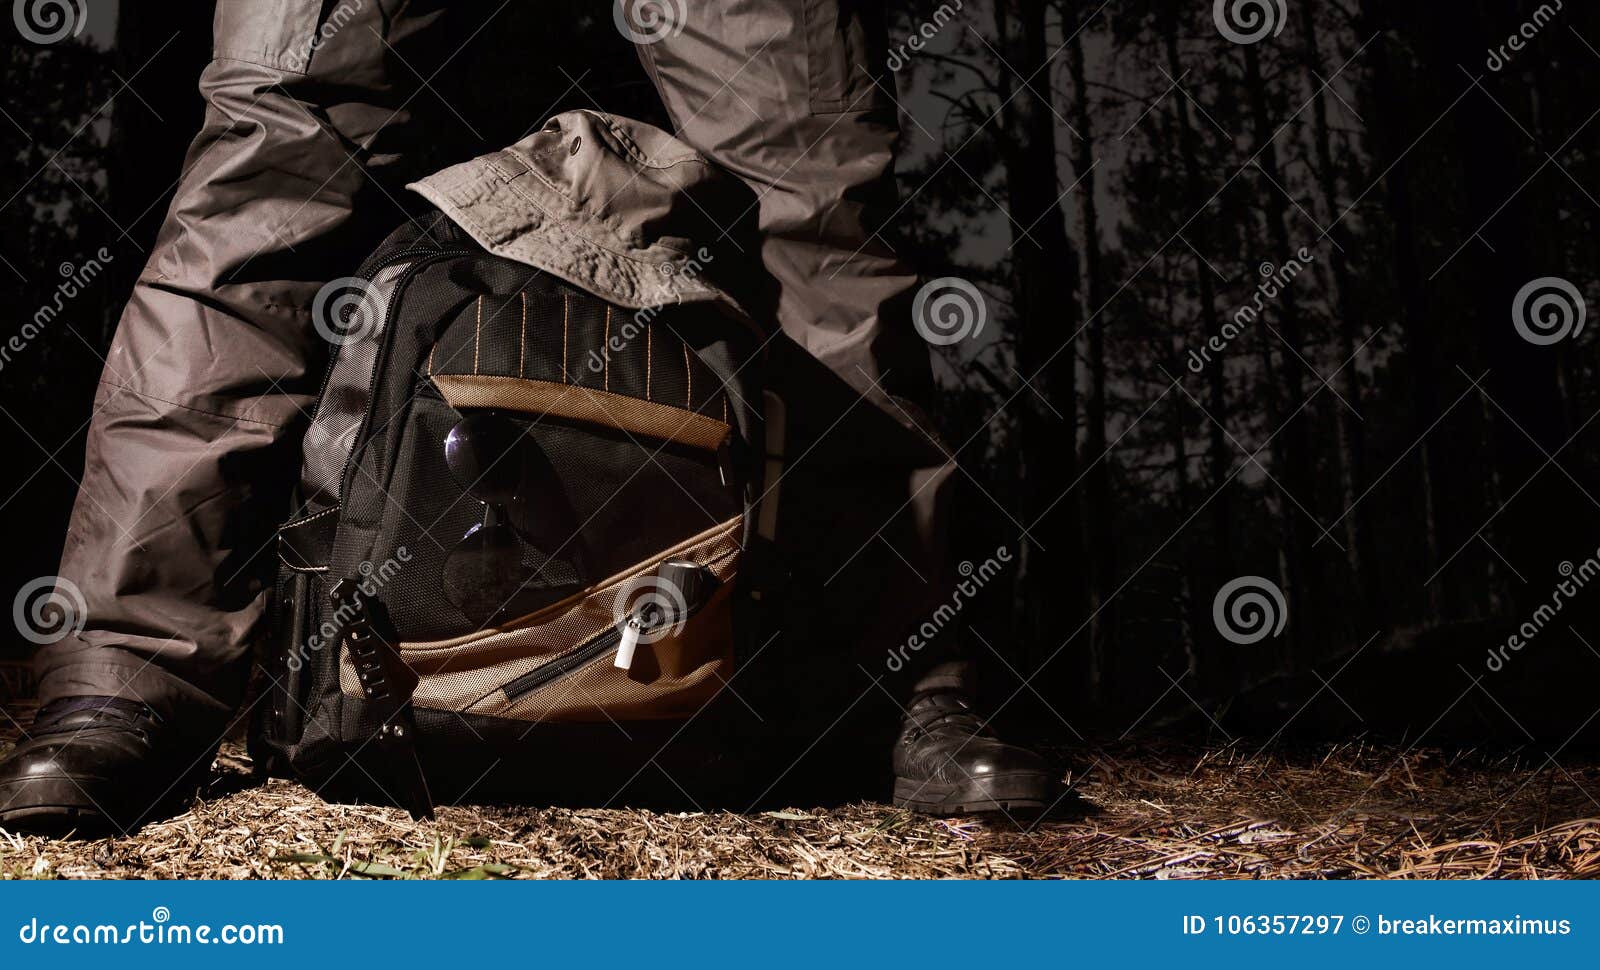 Camping Tactical Gear in Night Woods. Stock Image - Image of wilderness,  scenery: 106357297